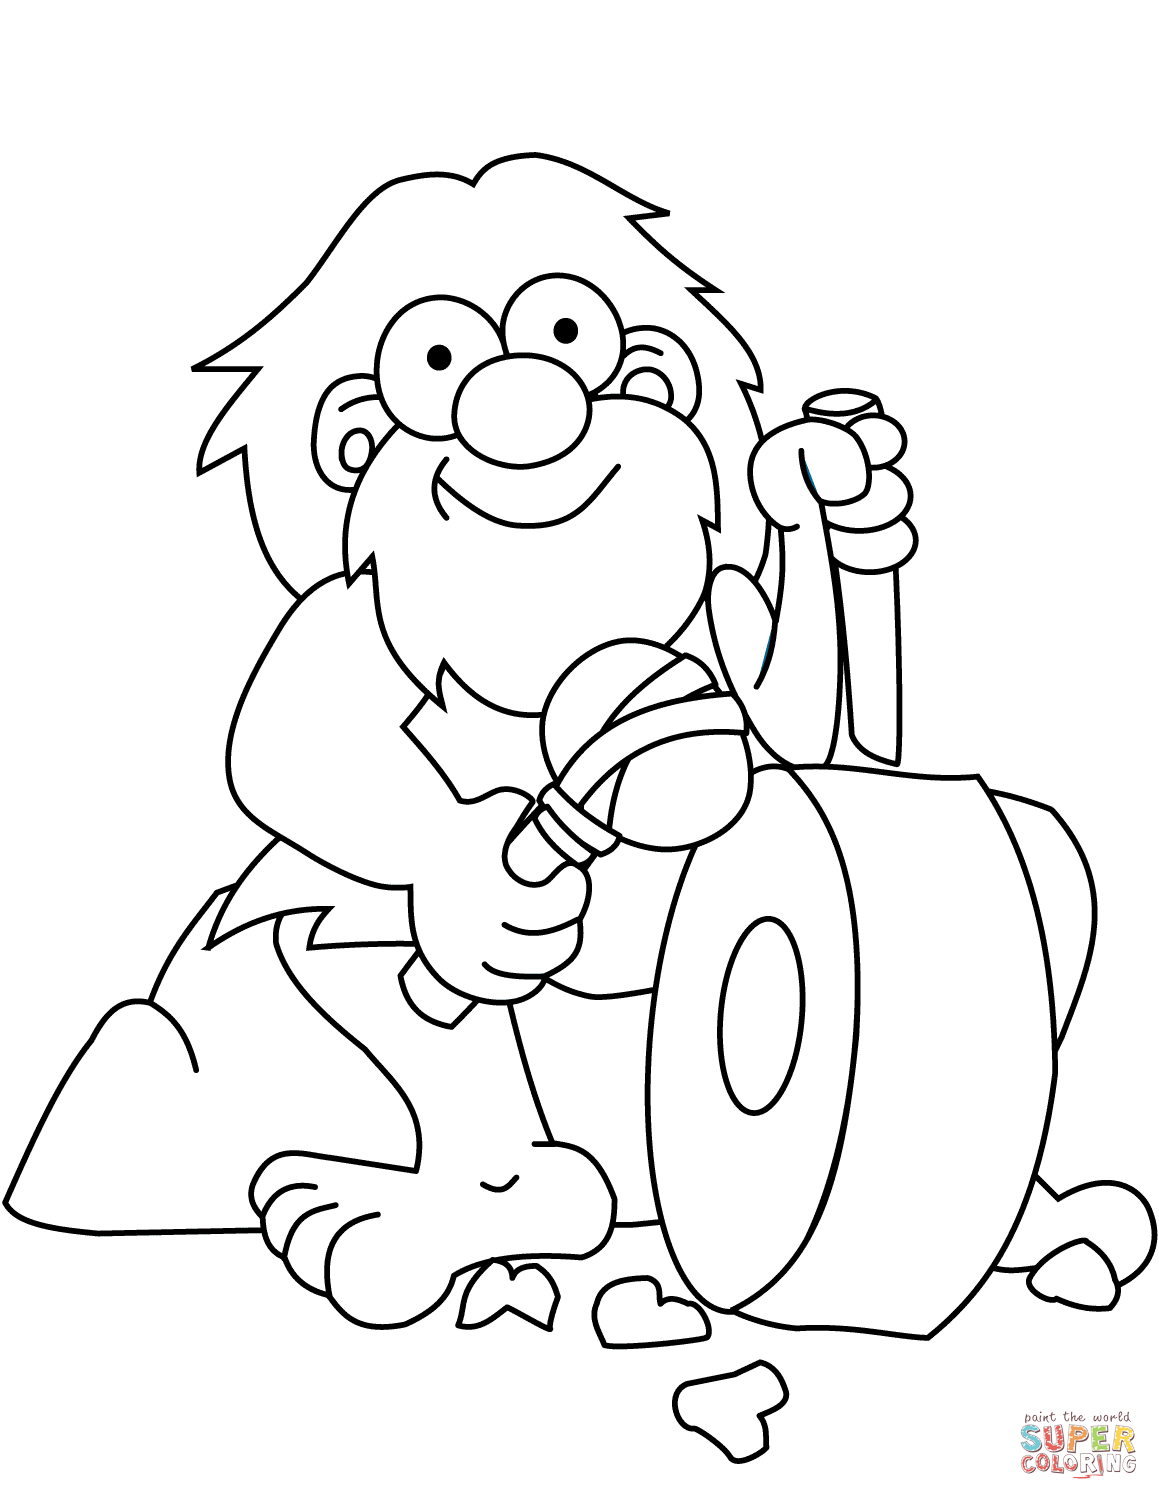 Caveman Sharpen Axe and Knife coloring page | Free Printable ...